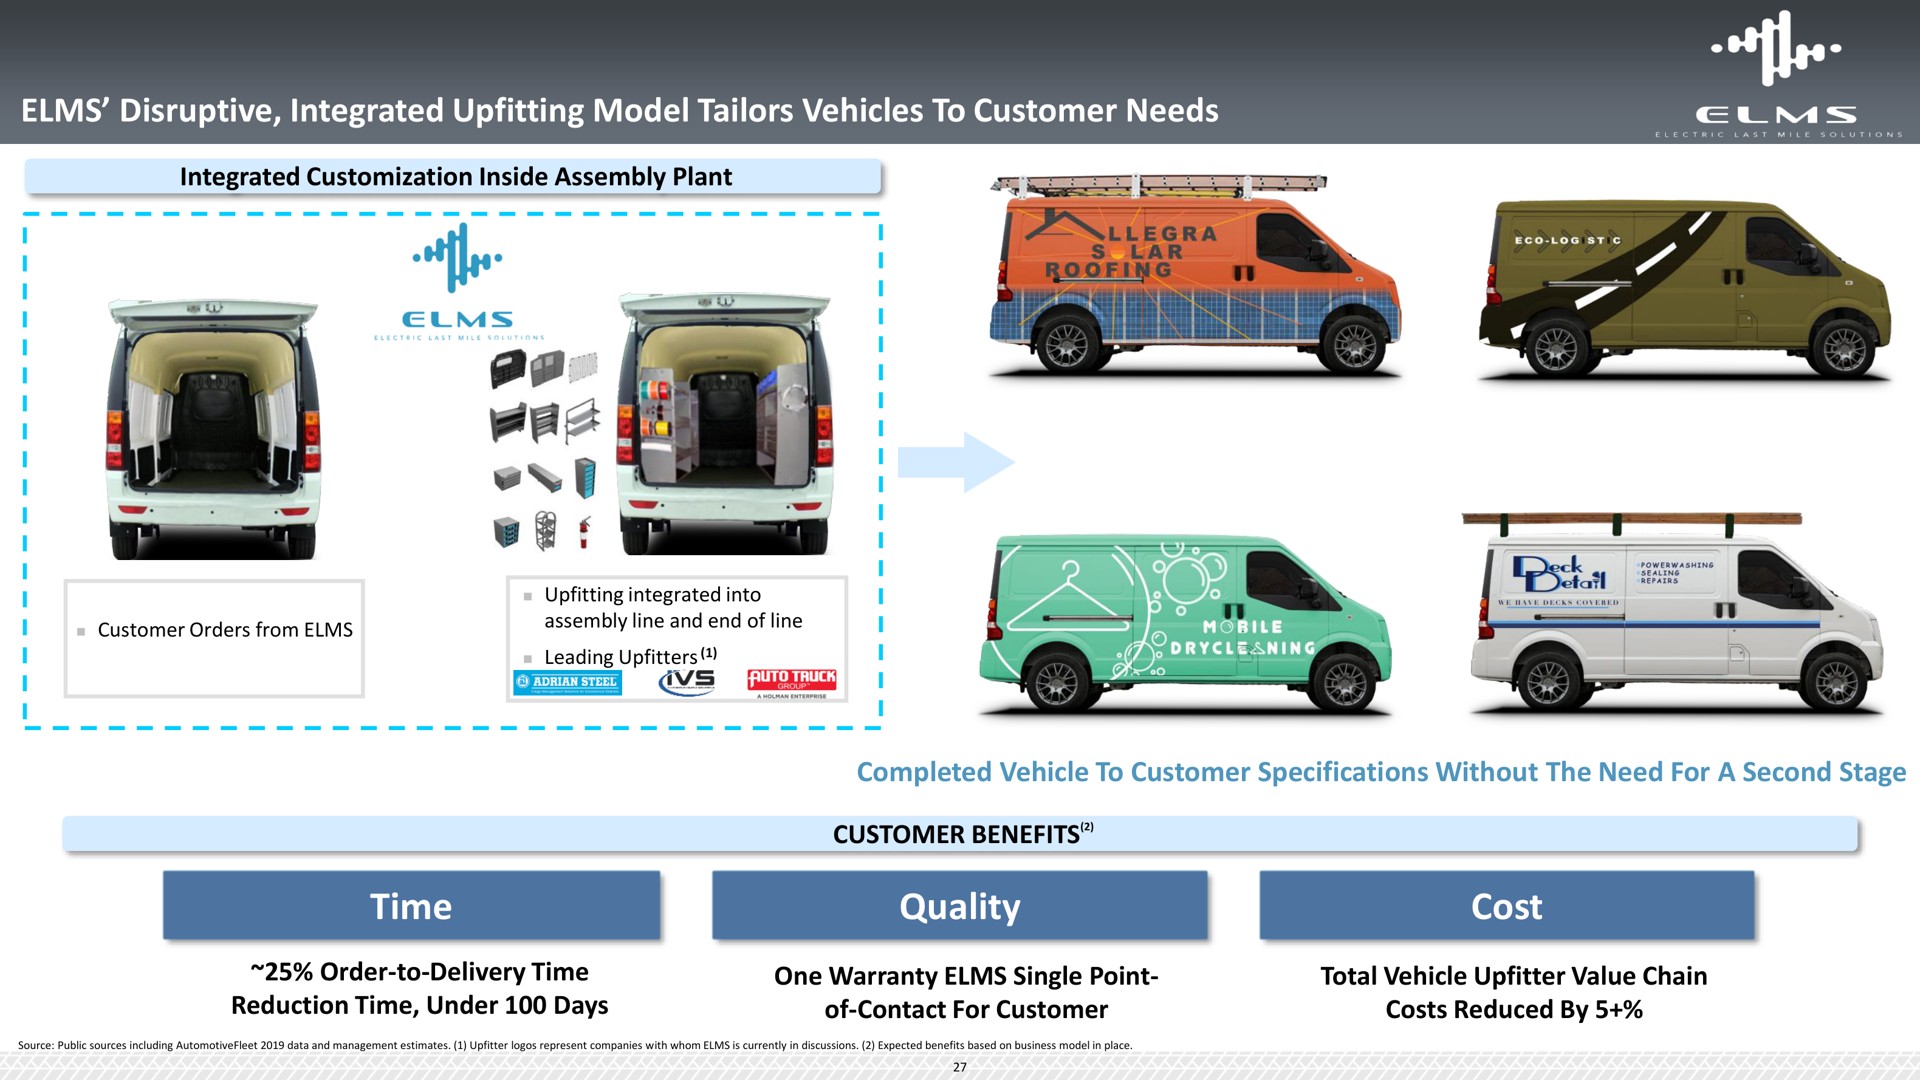 elms disruptive integrated model tailors vehicles to customer needs time quality cost anal | Elms